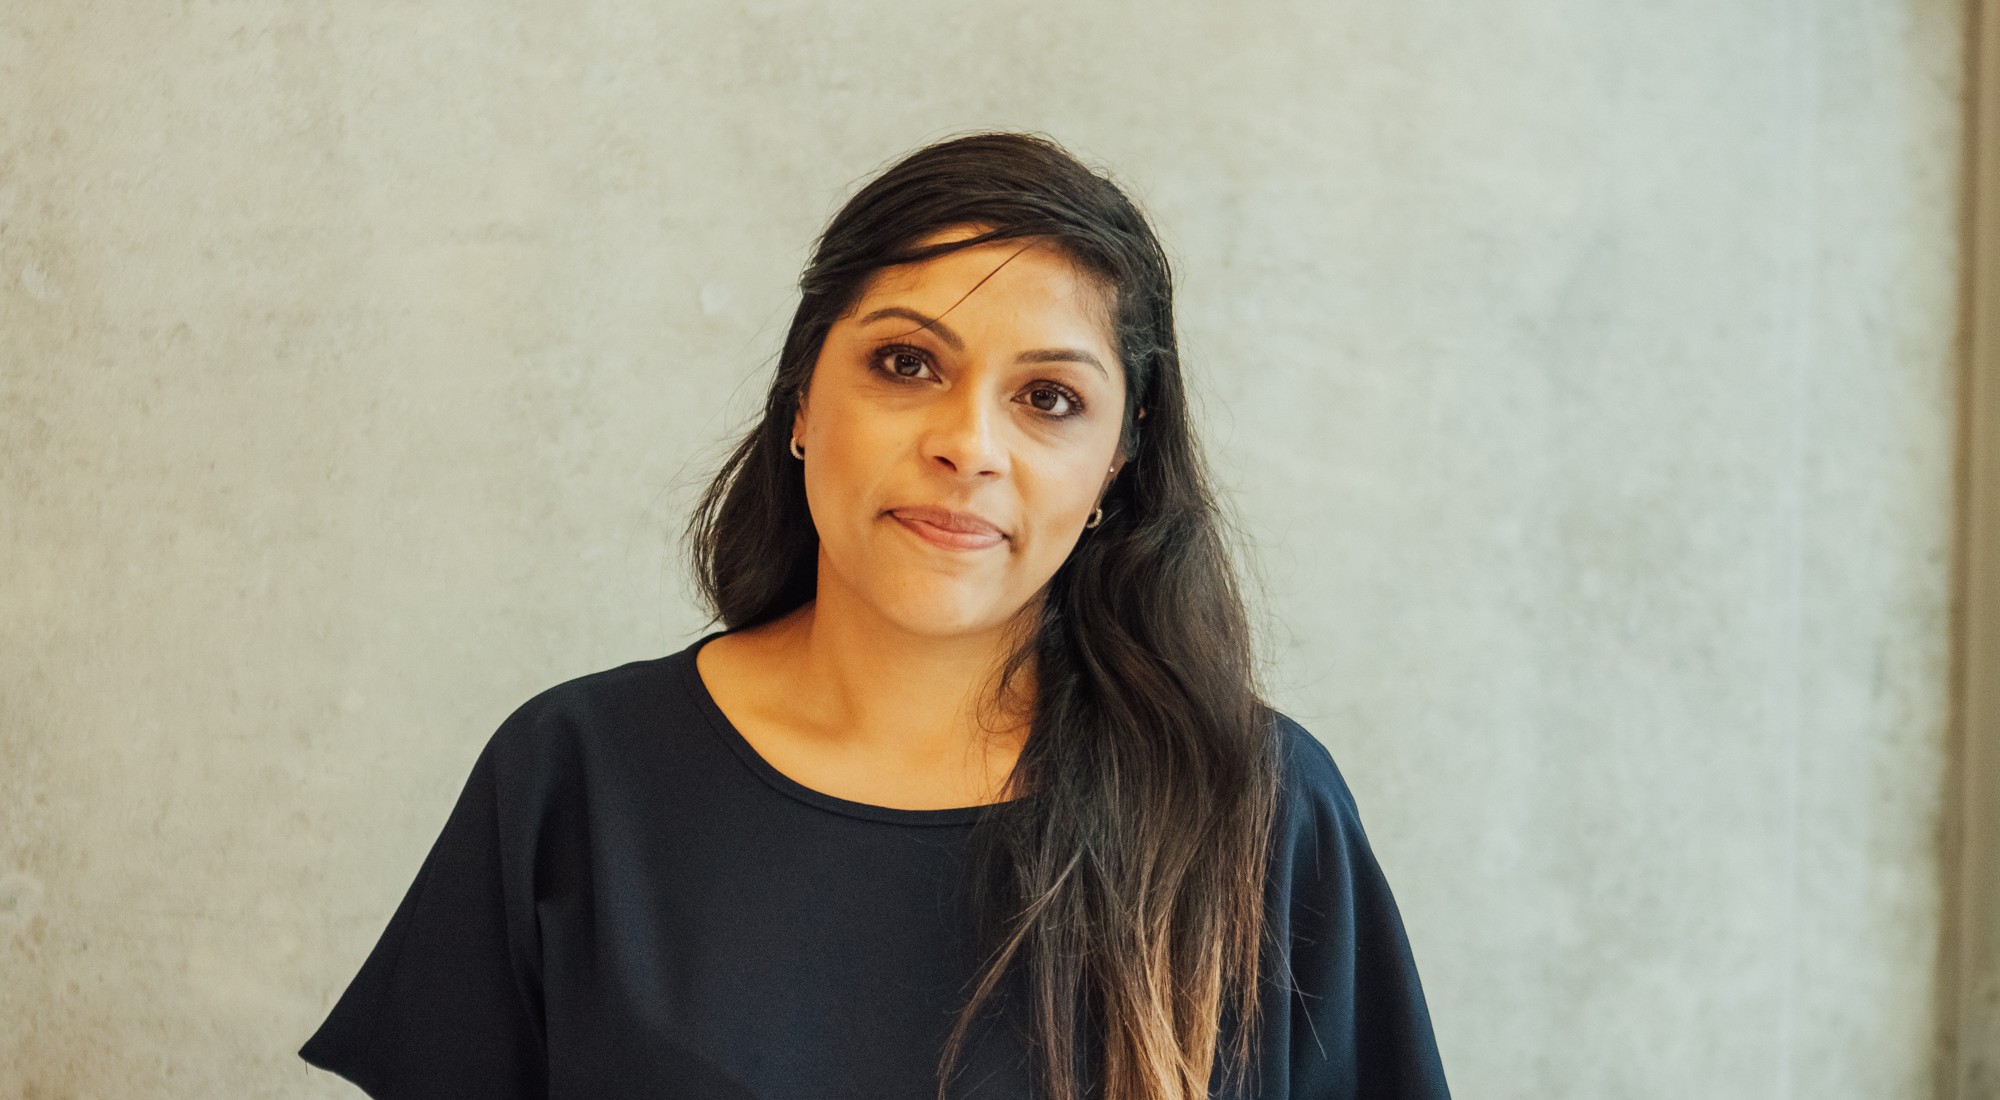 Manisha is a safe pair of hands when it comes to requiring straightforward advice and looking at alternatives to Court proceedings